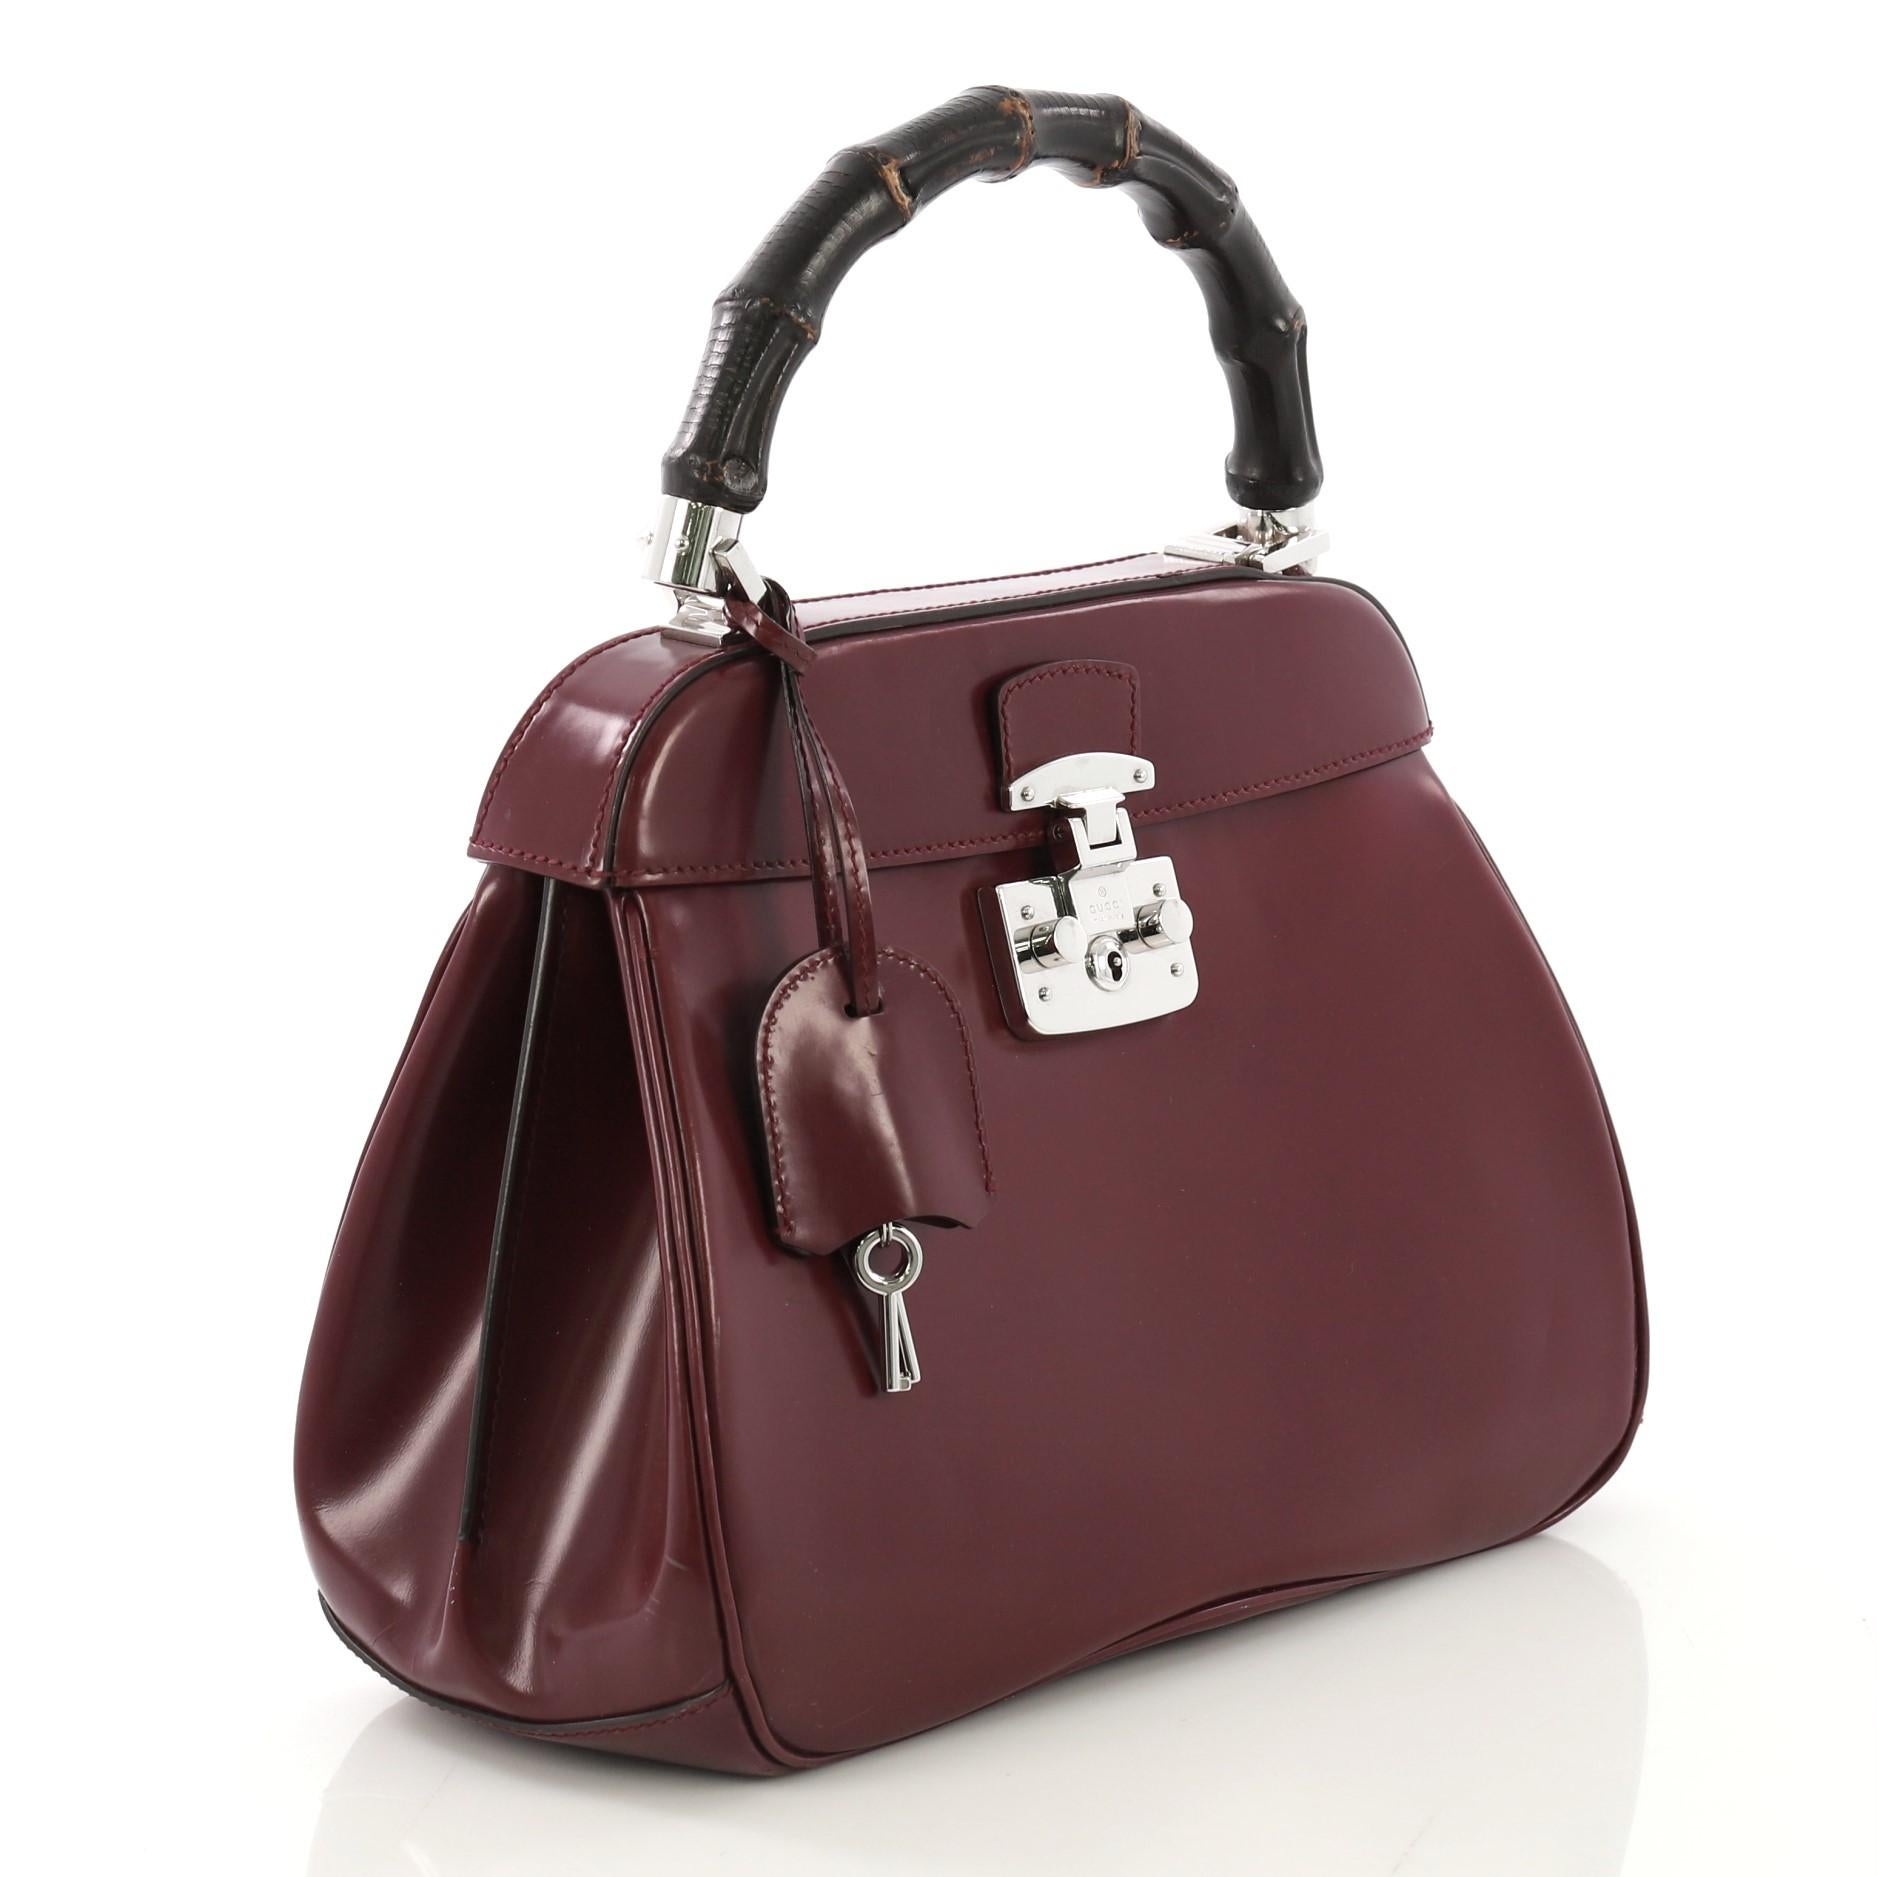 This Gucci Lady Lock Bamboo Top Handle Bag Leather Medium, crafted in purple leather, features a single loop bamboo handle and silver-tone hardware. Its flap with lady lock closure opens to a purple microfiber interior divided into two compartments